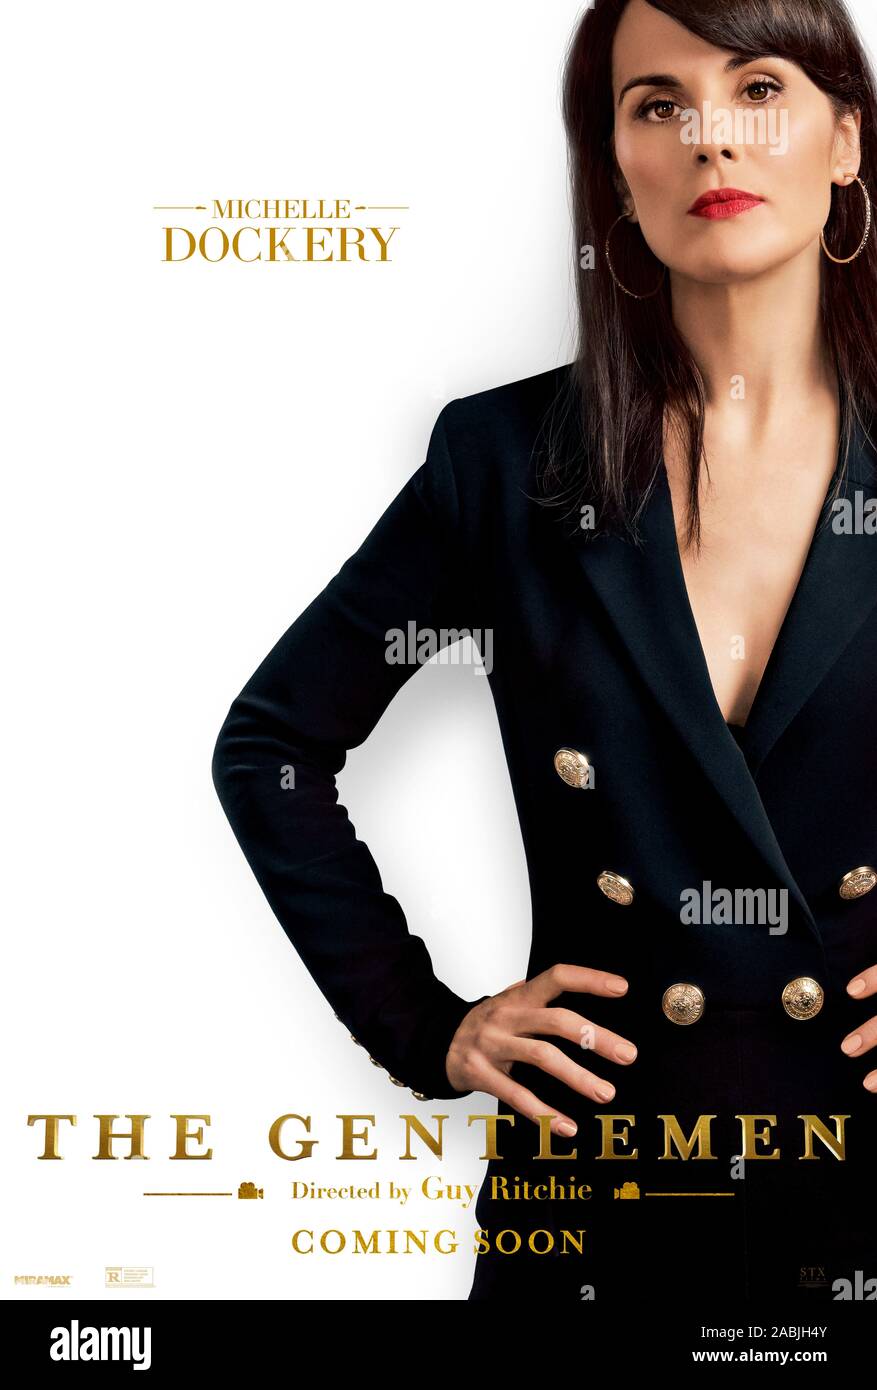 RELEASE DATE: January 24, 2020 TITLE: The Gentlemen STUDIO: Miramax DIRECTOR: Guy Ritchie PLOT: A British drug lord tries to sell off his highly profitable empire to a dynasty of Oklahoma billionaires. STARRING: MICHELLE DOCKERY poster art. (Credit Image: © Miramax/Entertainment Pictures) Stock Photo